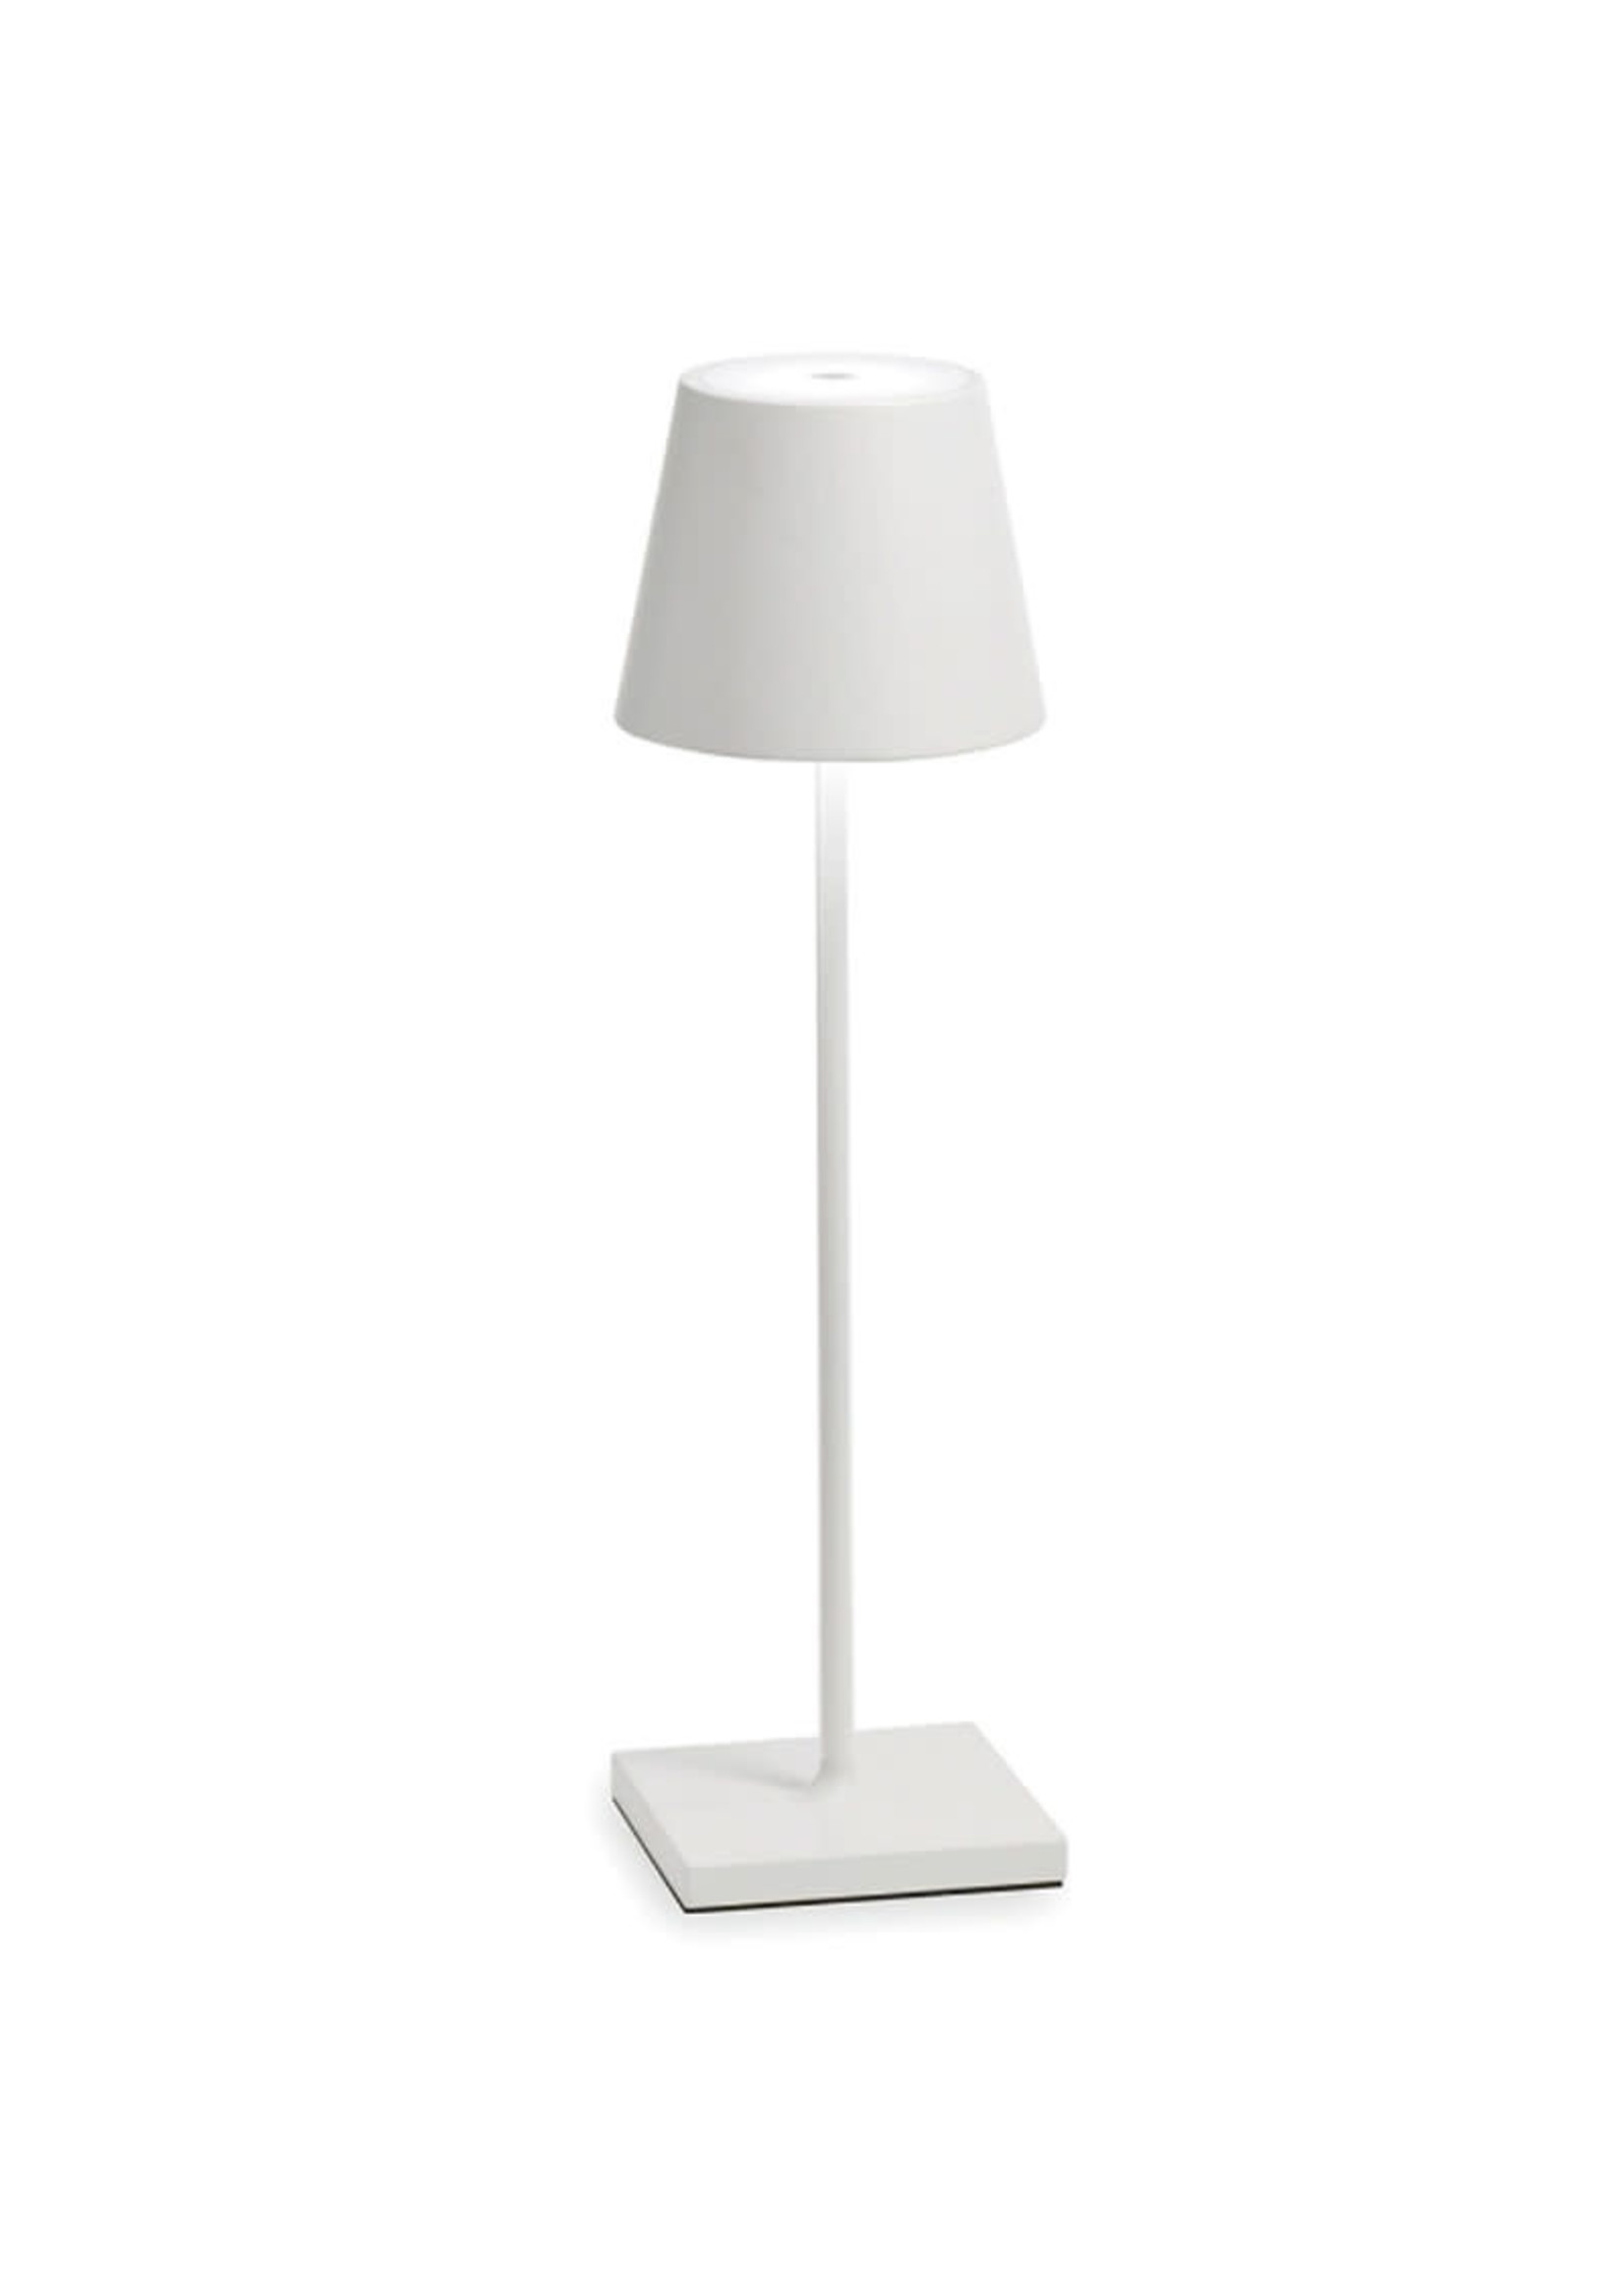 Rechargeable Table Lamp - White